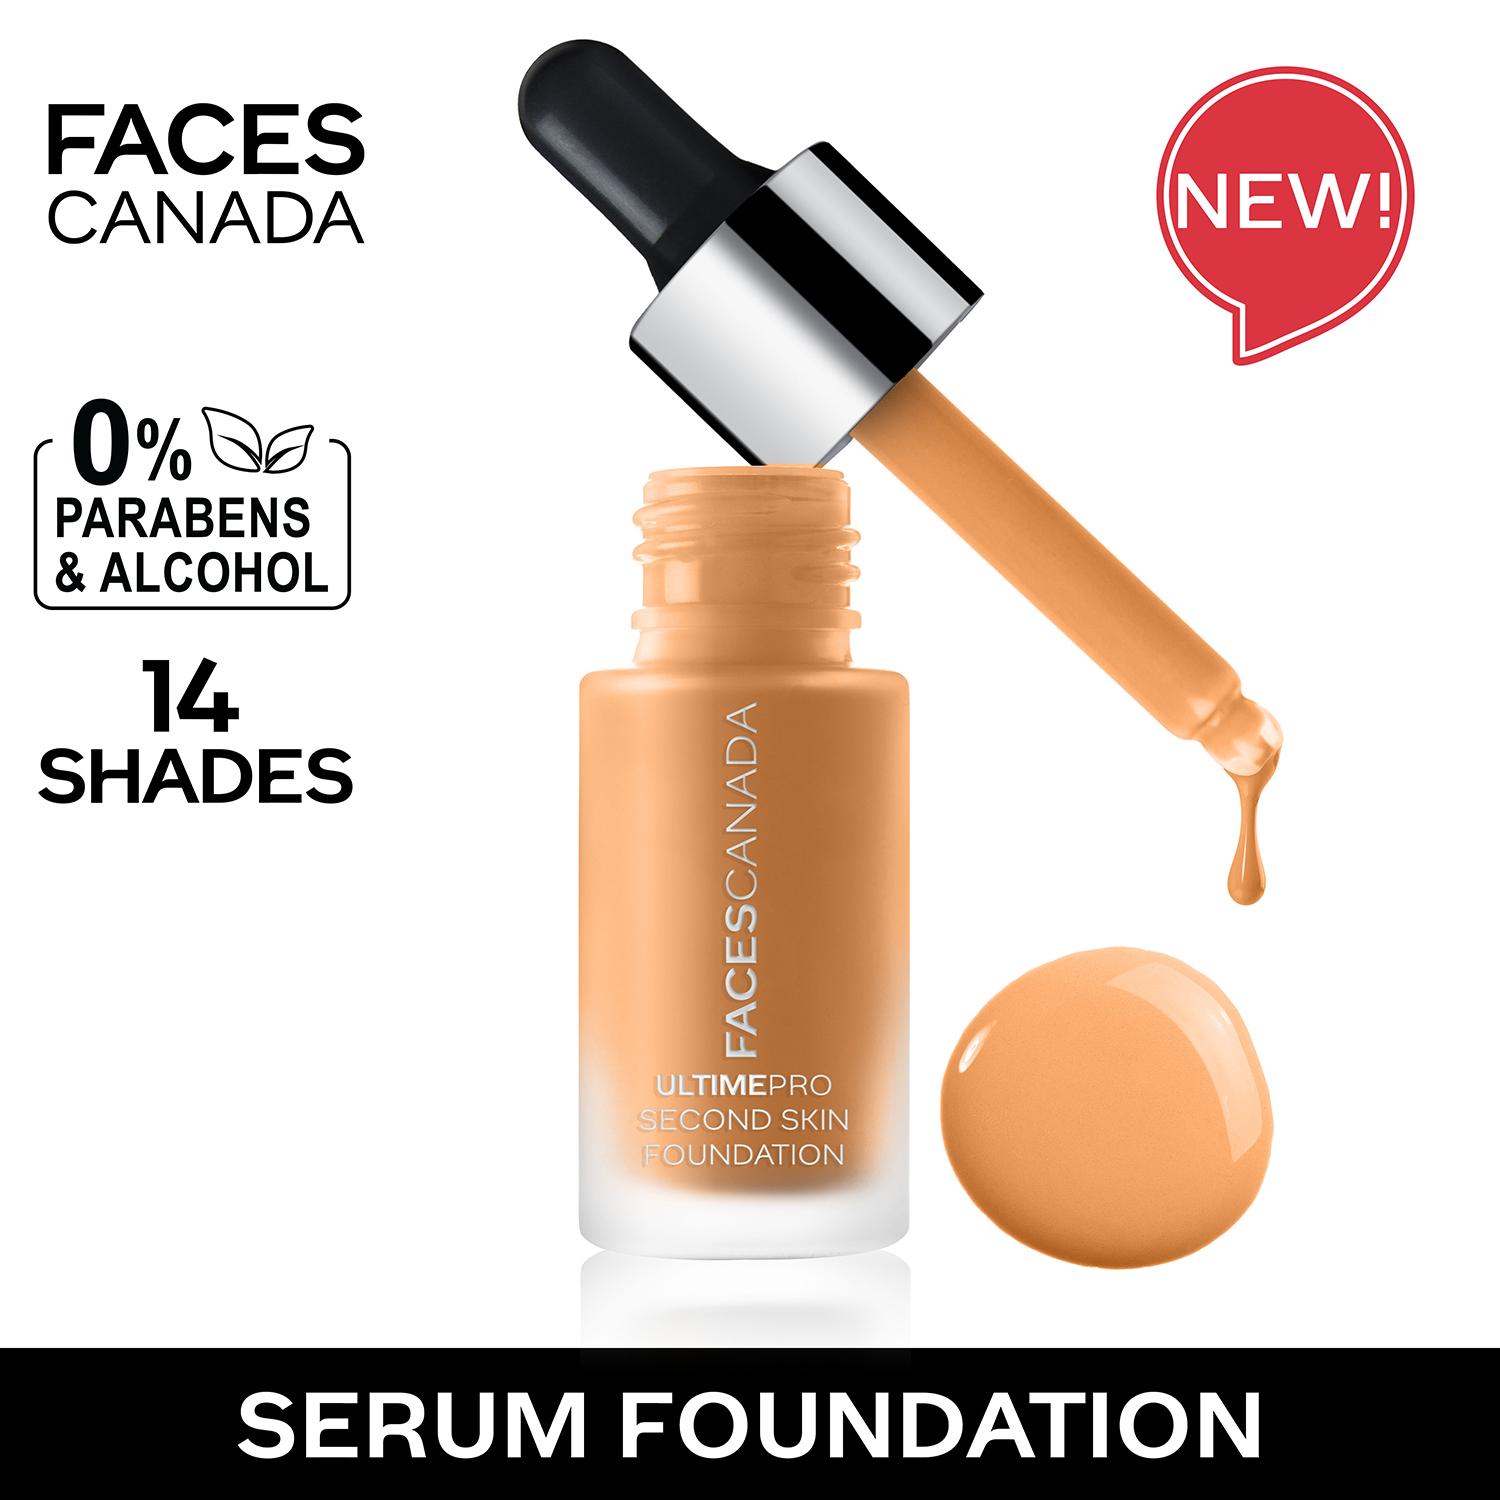 Faces Canada | Faces Canada Ultime Pro Second Skin Foundation - Honey Beige 031, Matte Finish, SPF 15 (15 ml)